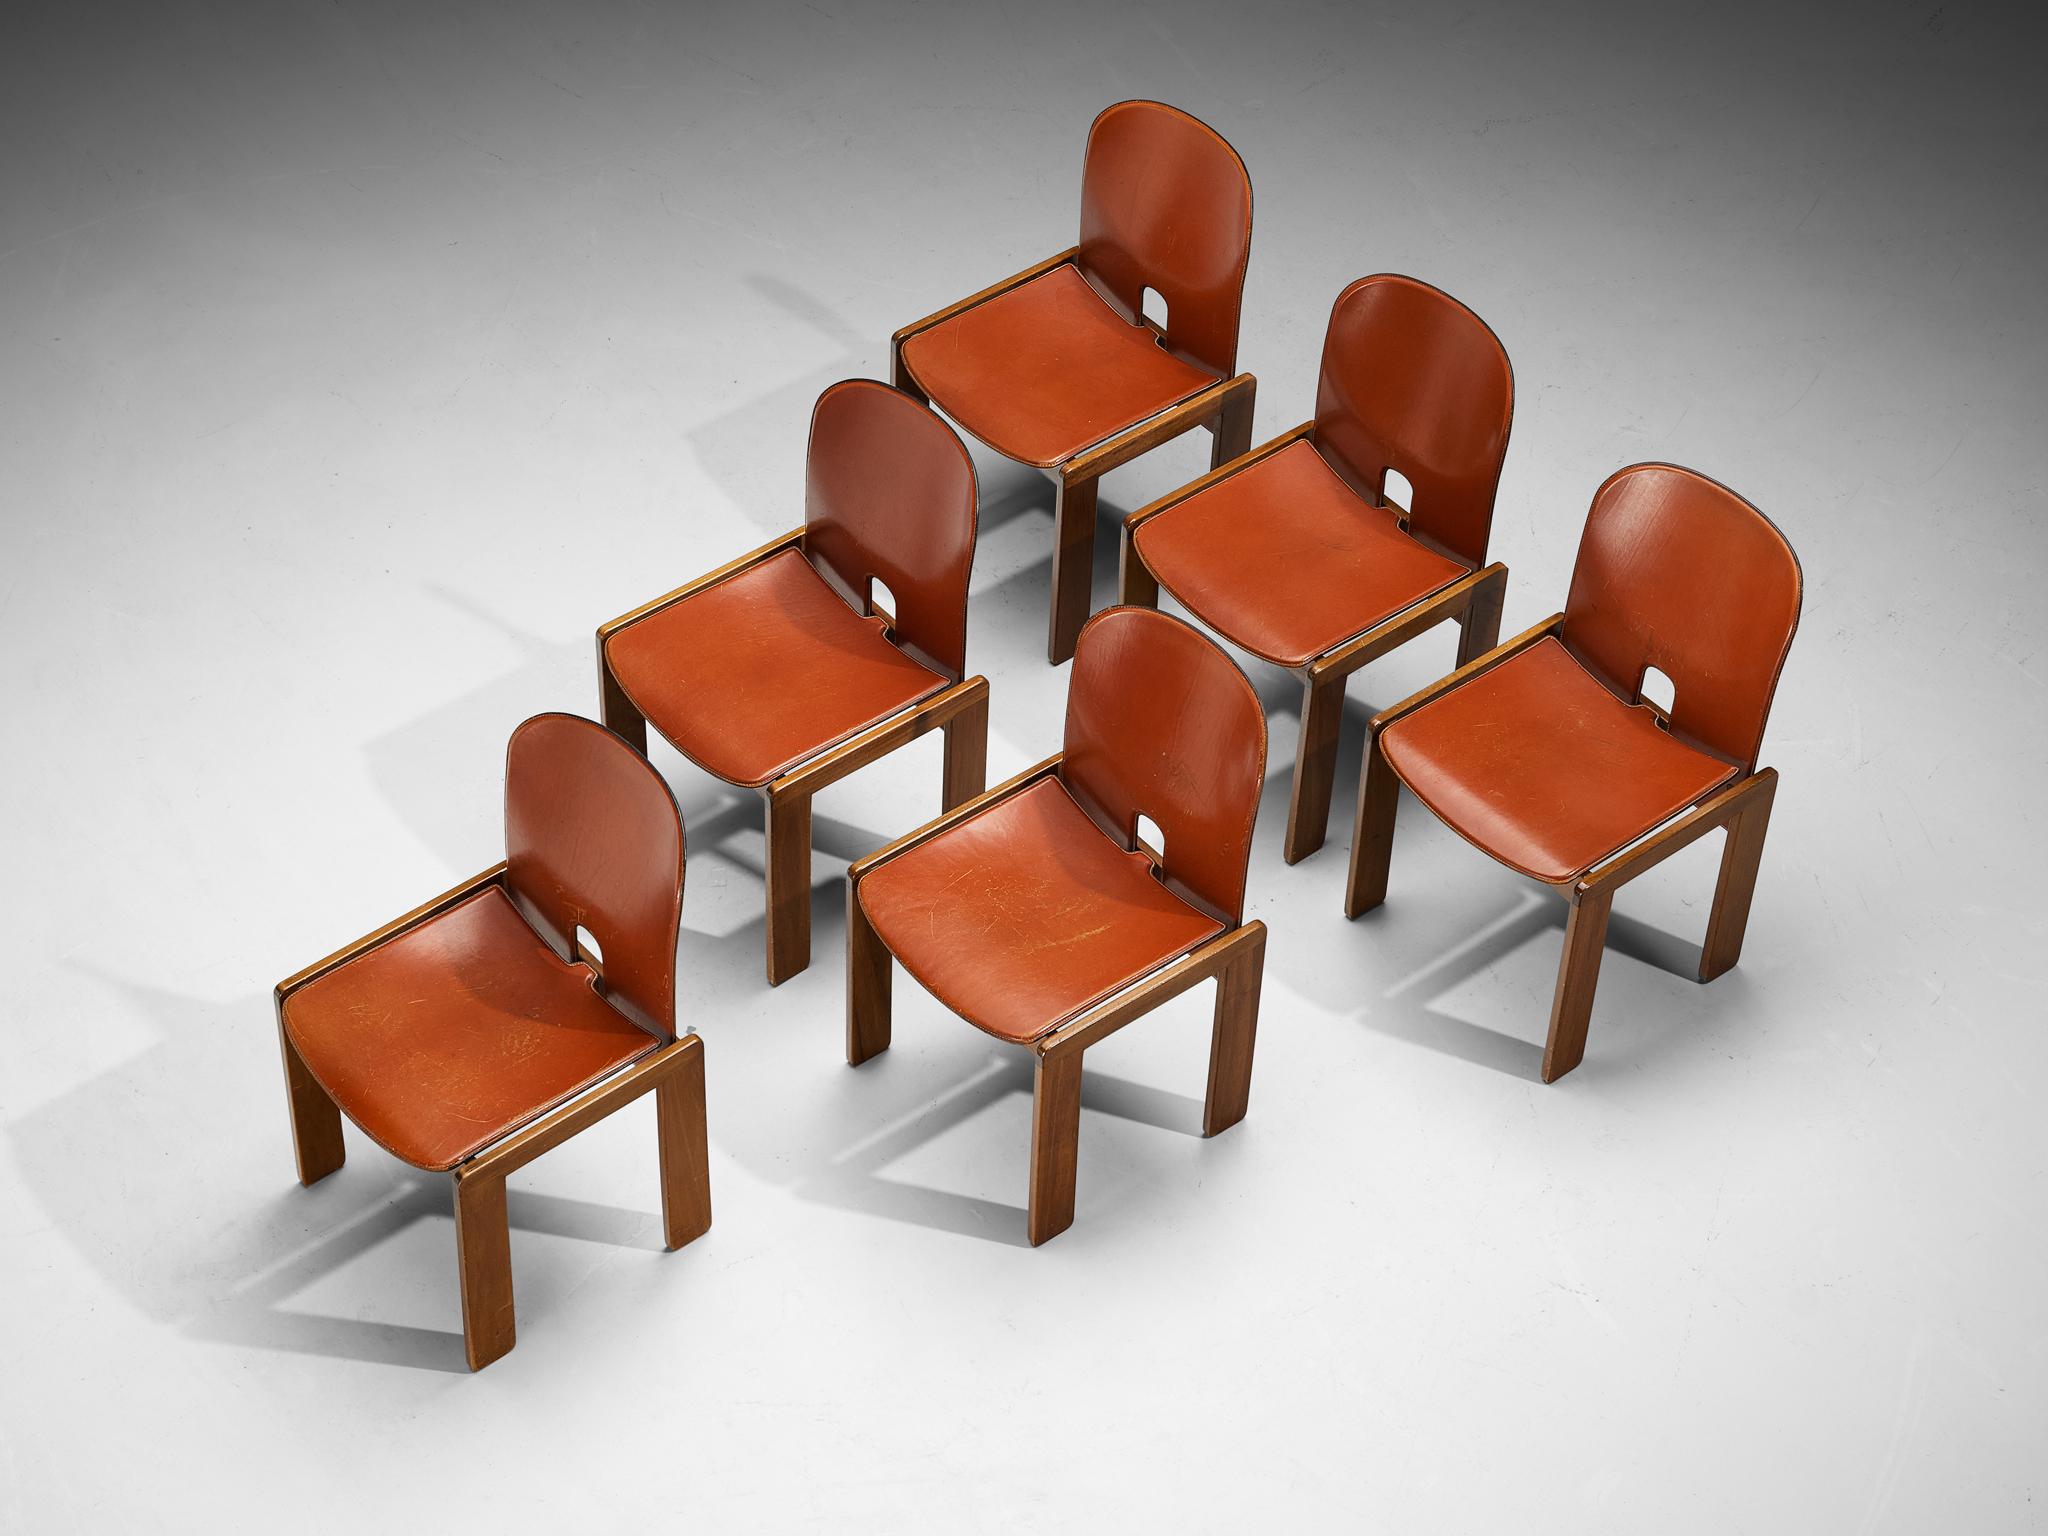 Afra & Tobia Scarpa for Cassina, set of six dining chairs model ‘121’, walnut, cognac leather, Italy, design 1965

Set of six dining chairs by the Italian designer couple Tobia and Afra Scarpa. These chairs have a cubic and architectural appearance.